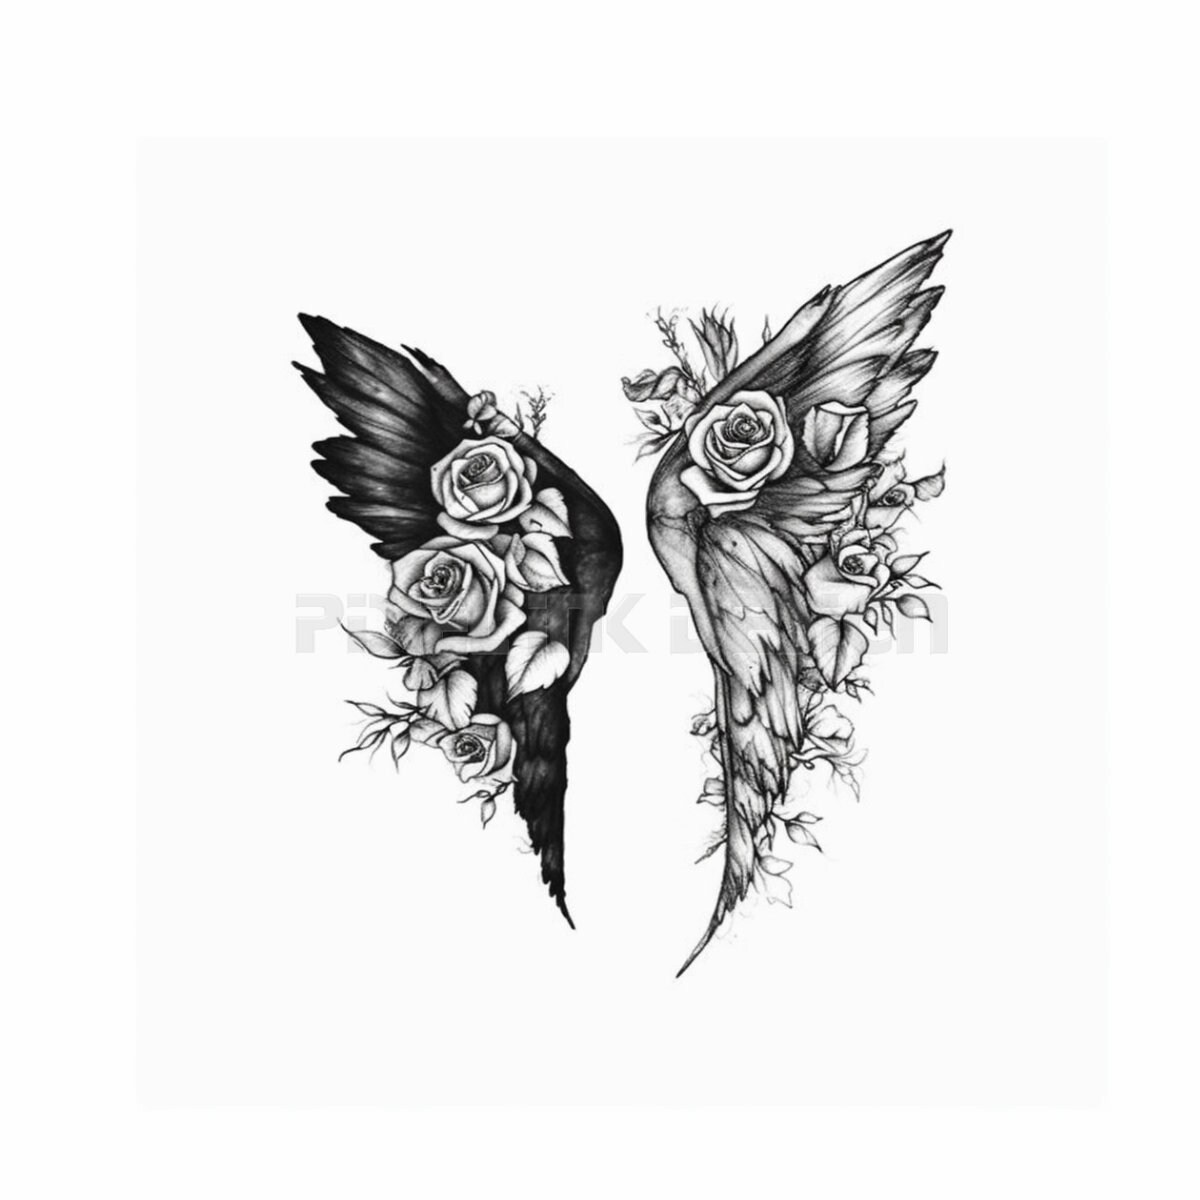 Angel Wings in Floral Style Tattoo Design White Background